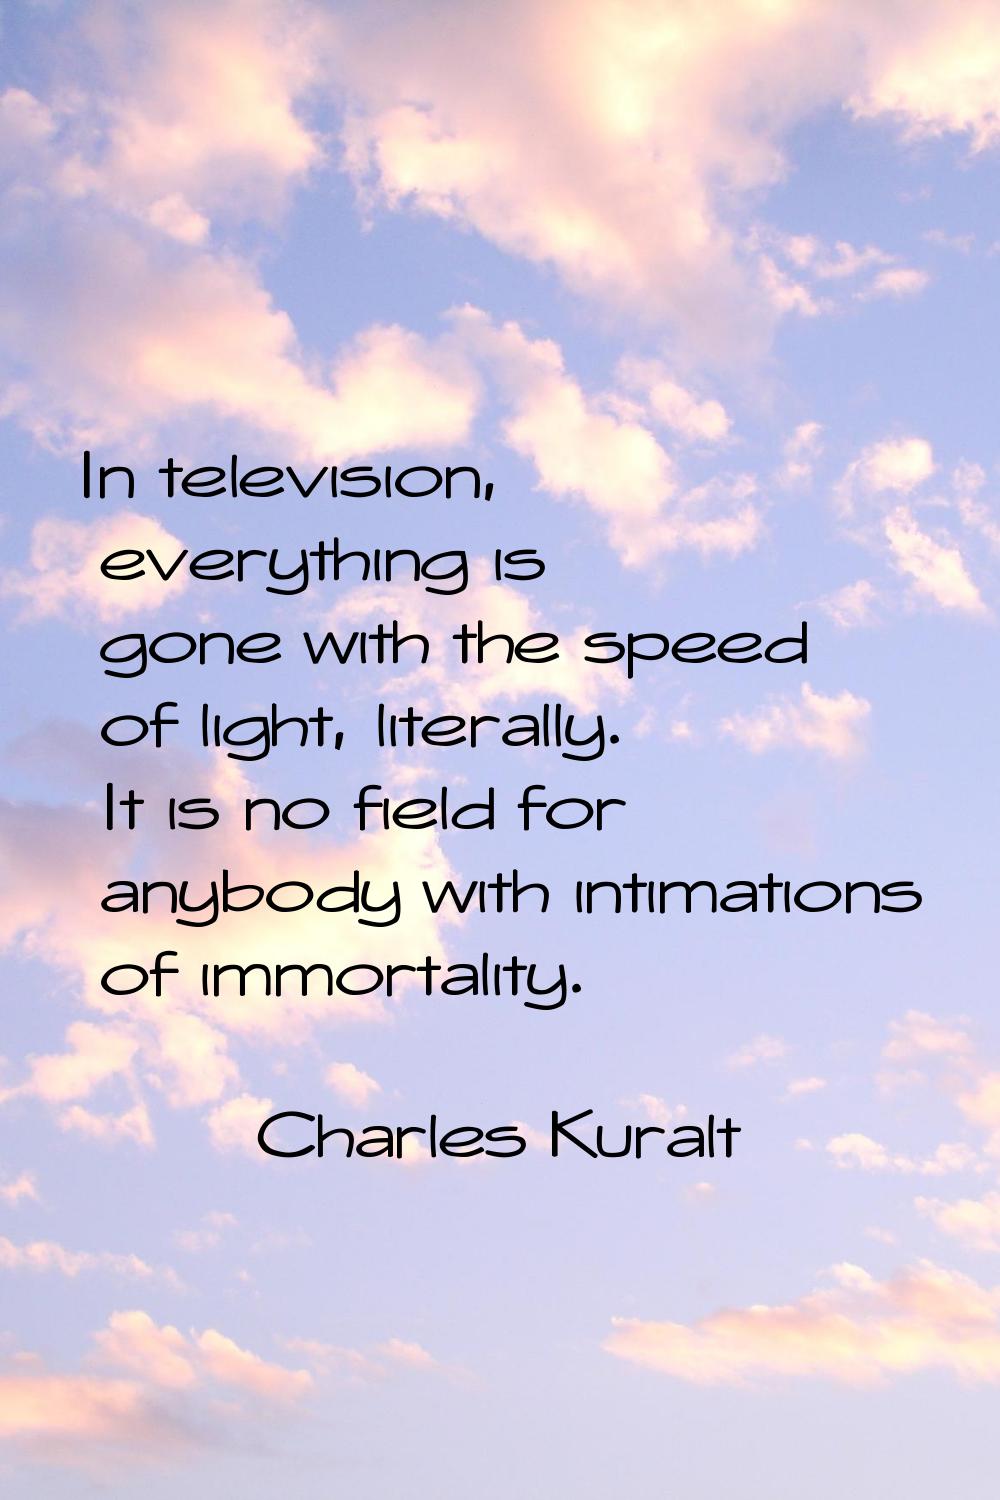 In television, everything is gone with the speed of light, literally. It is no field for anybody wi